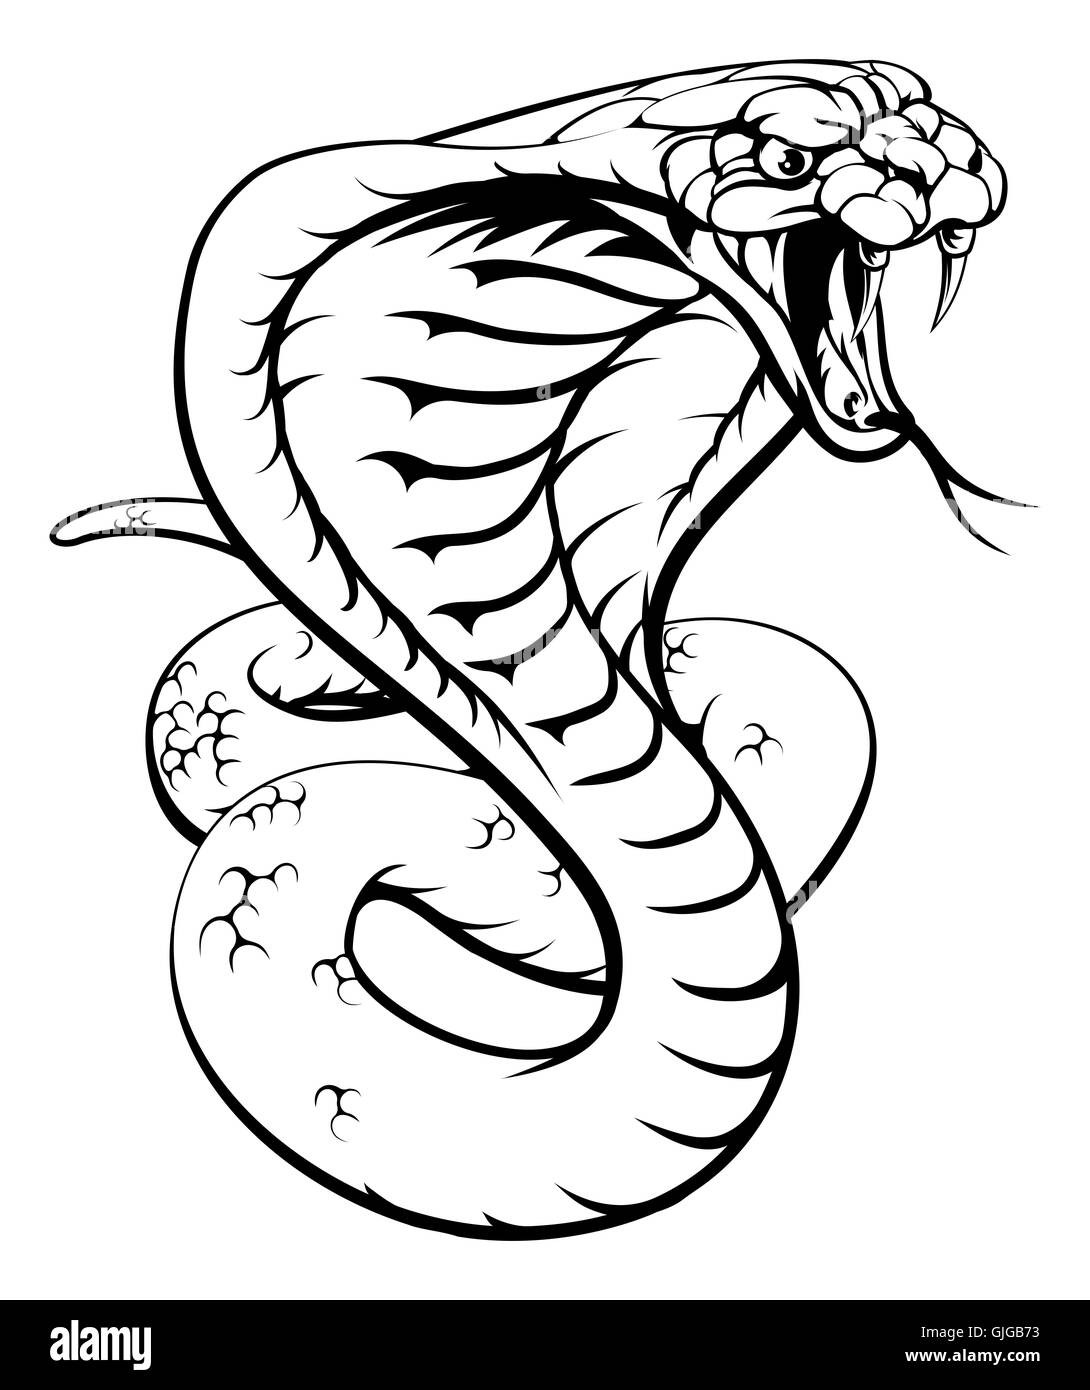 An illustration of a king cobra snake in black and white Stock Photo ...